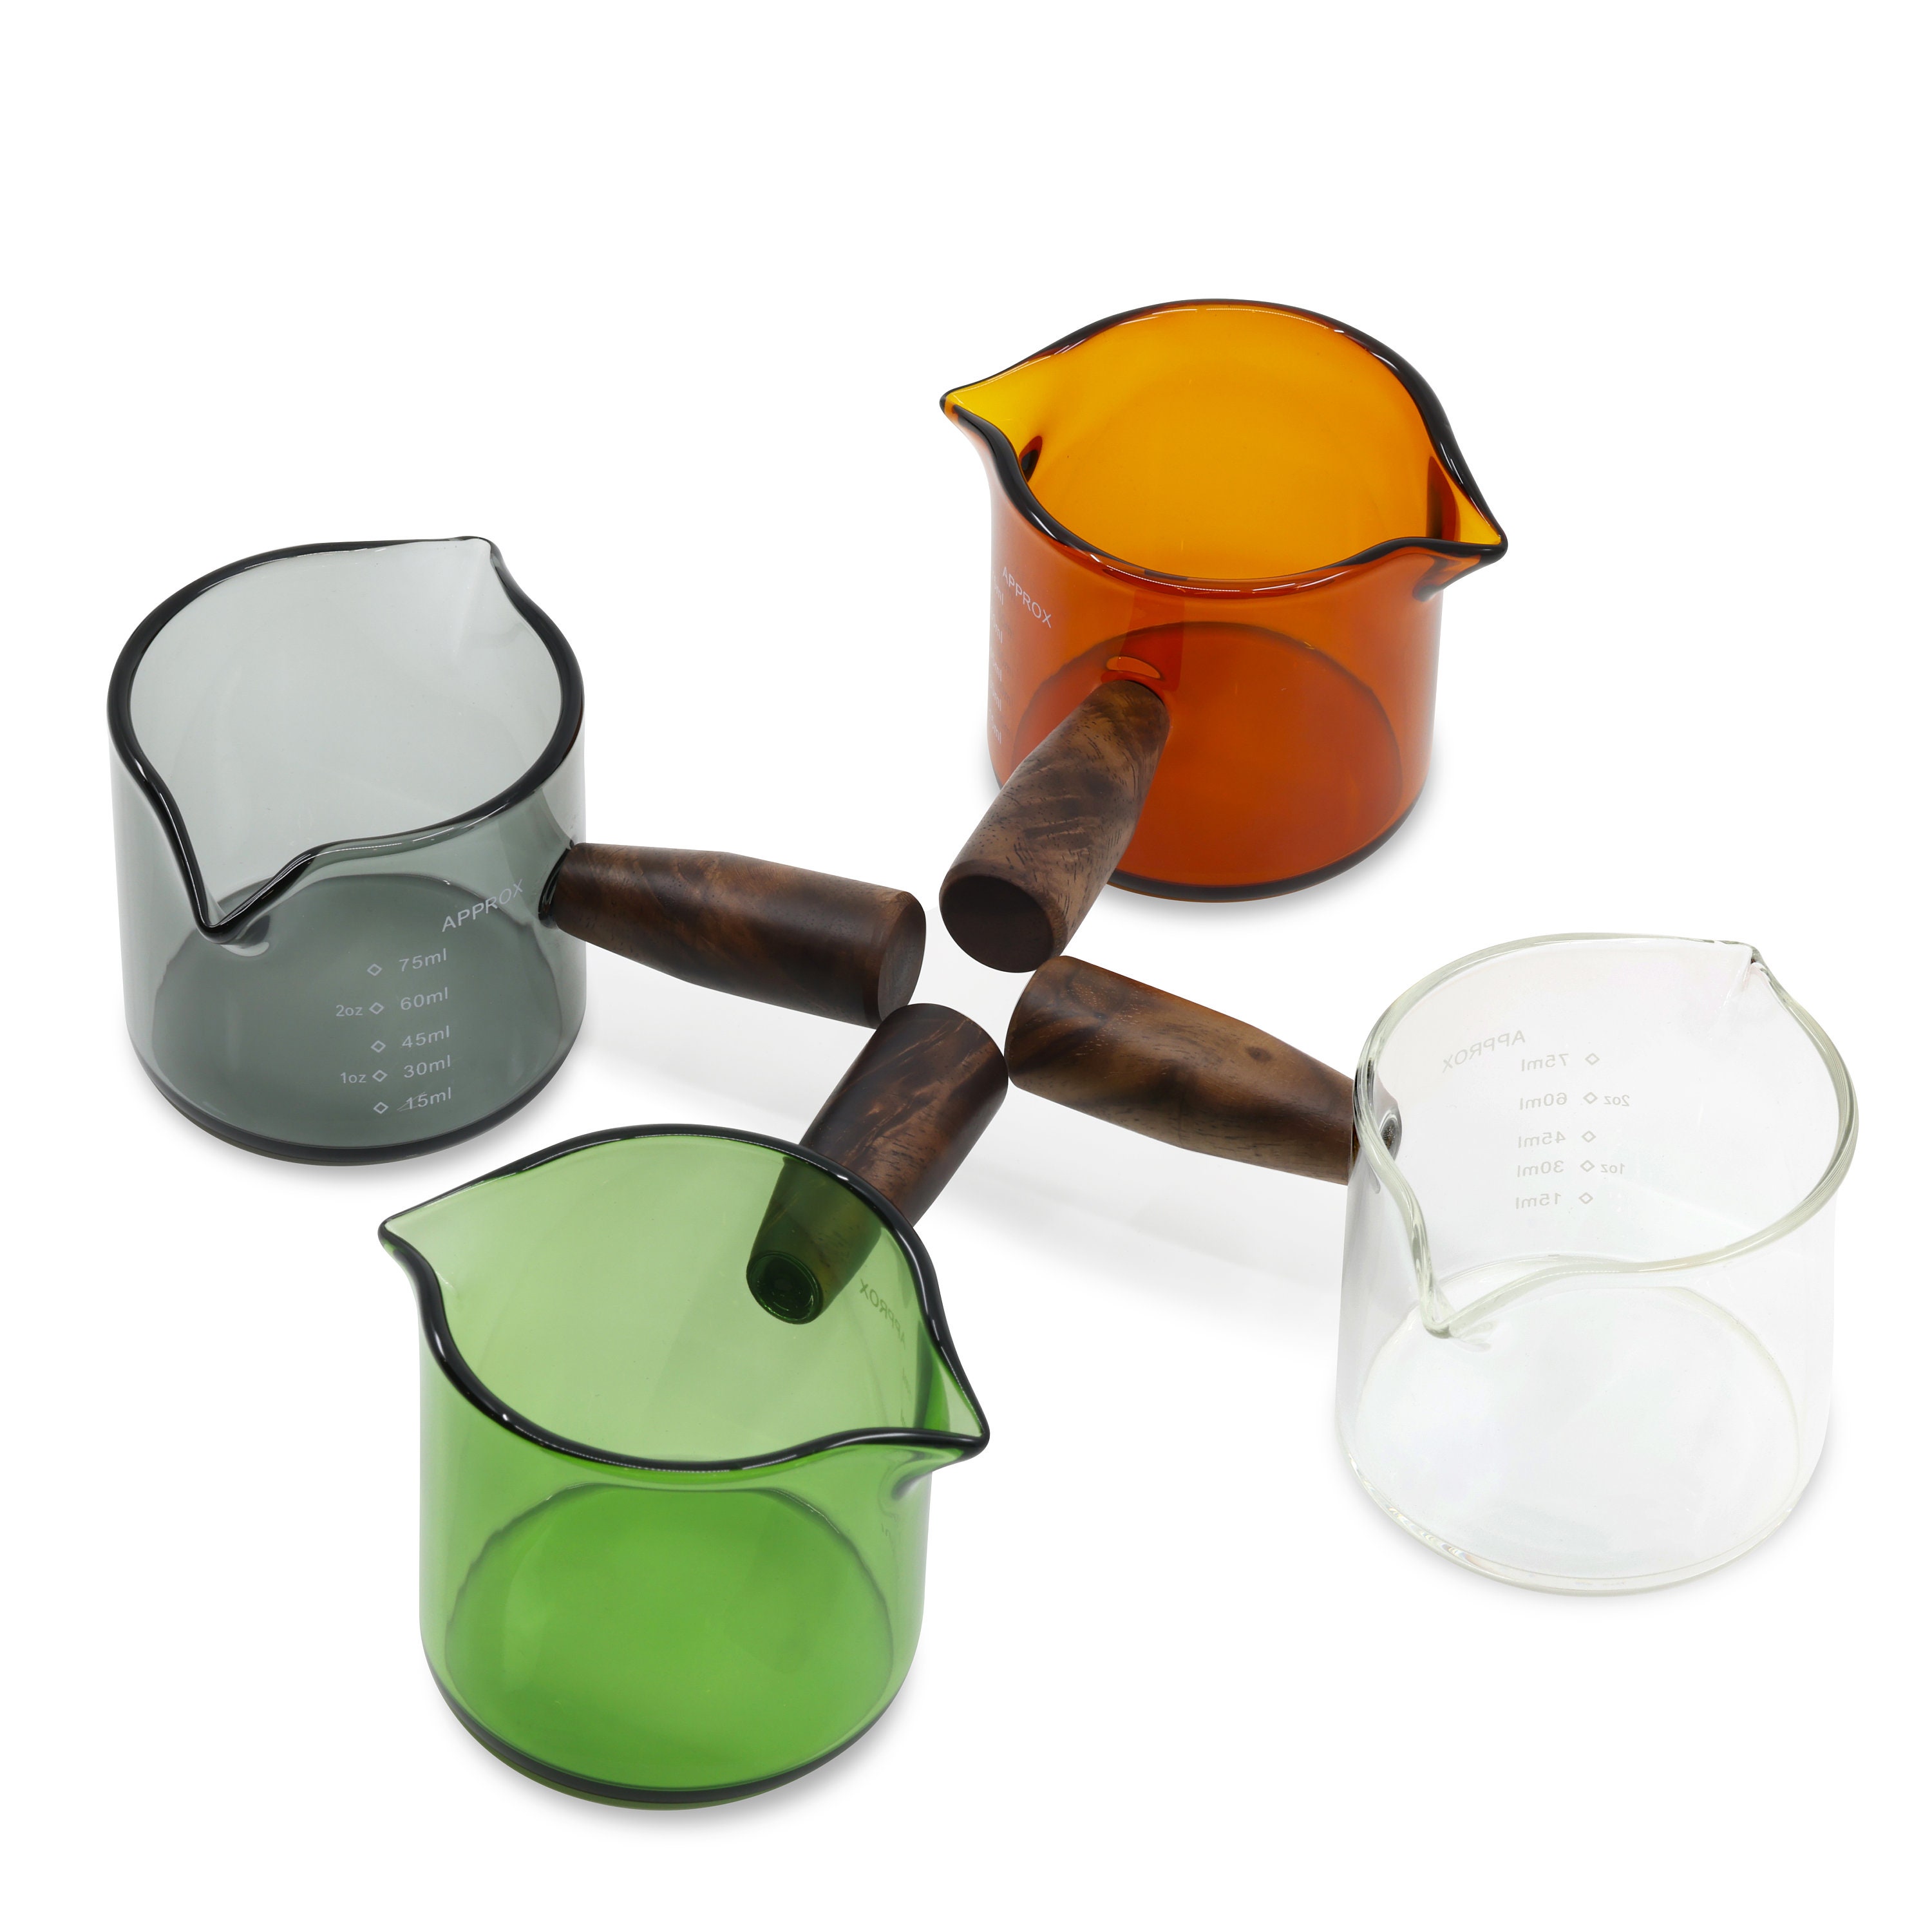 Espresso Shot Glass With Wood Handle - Double Spouts & Clear Scale